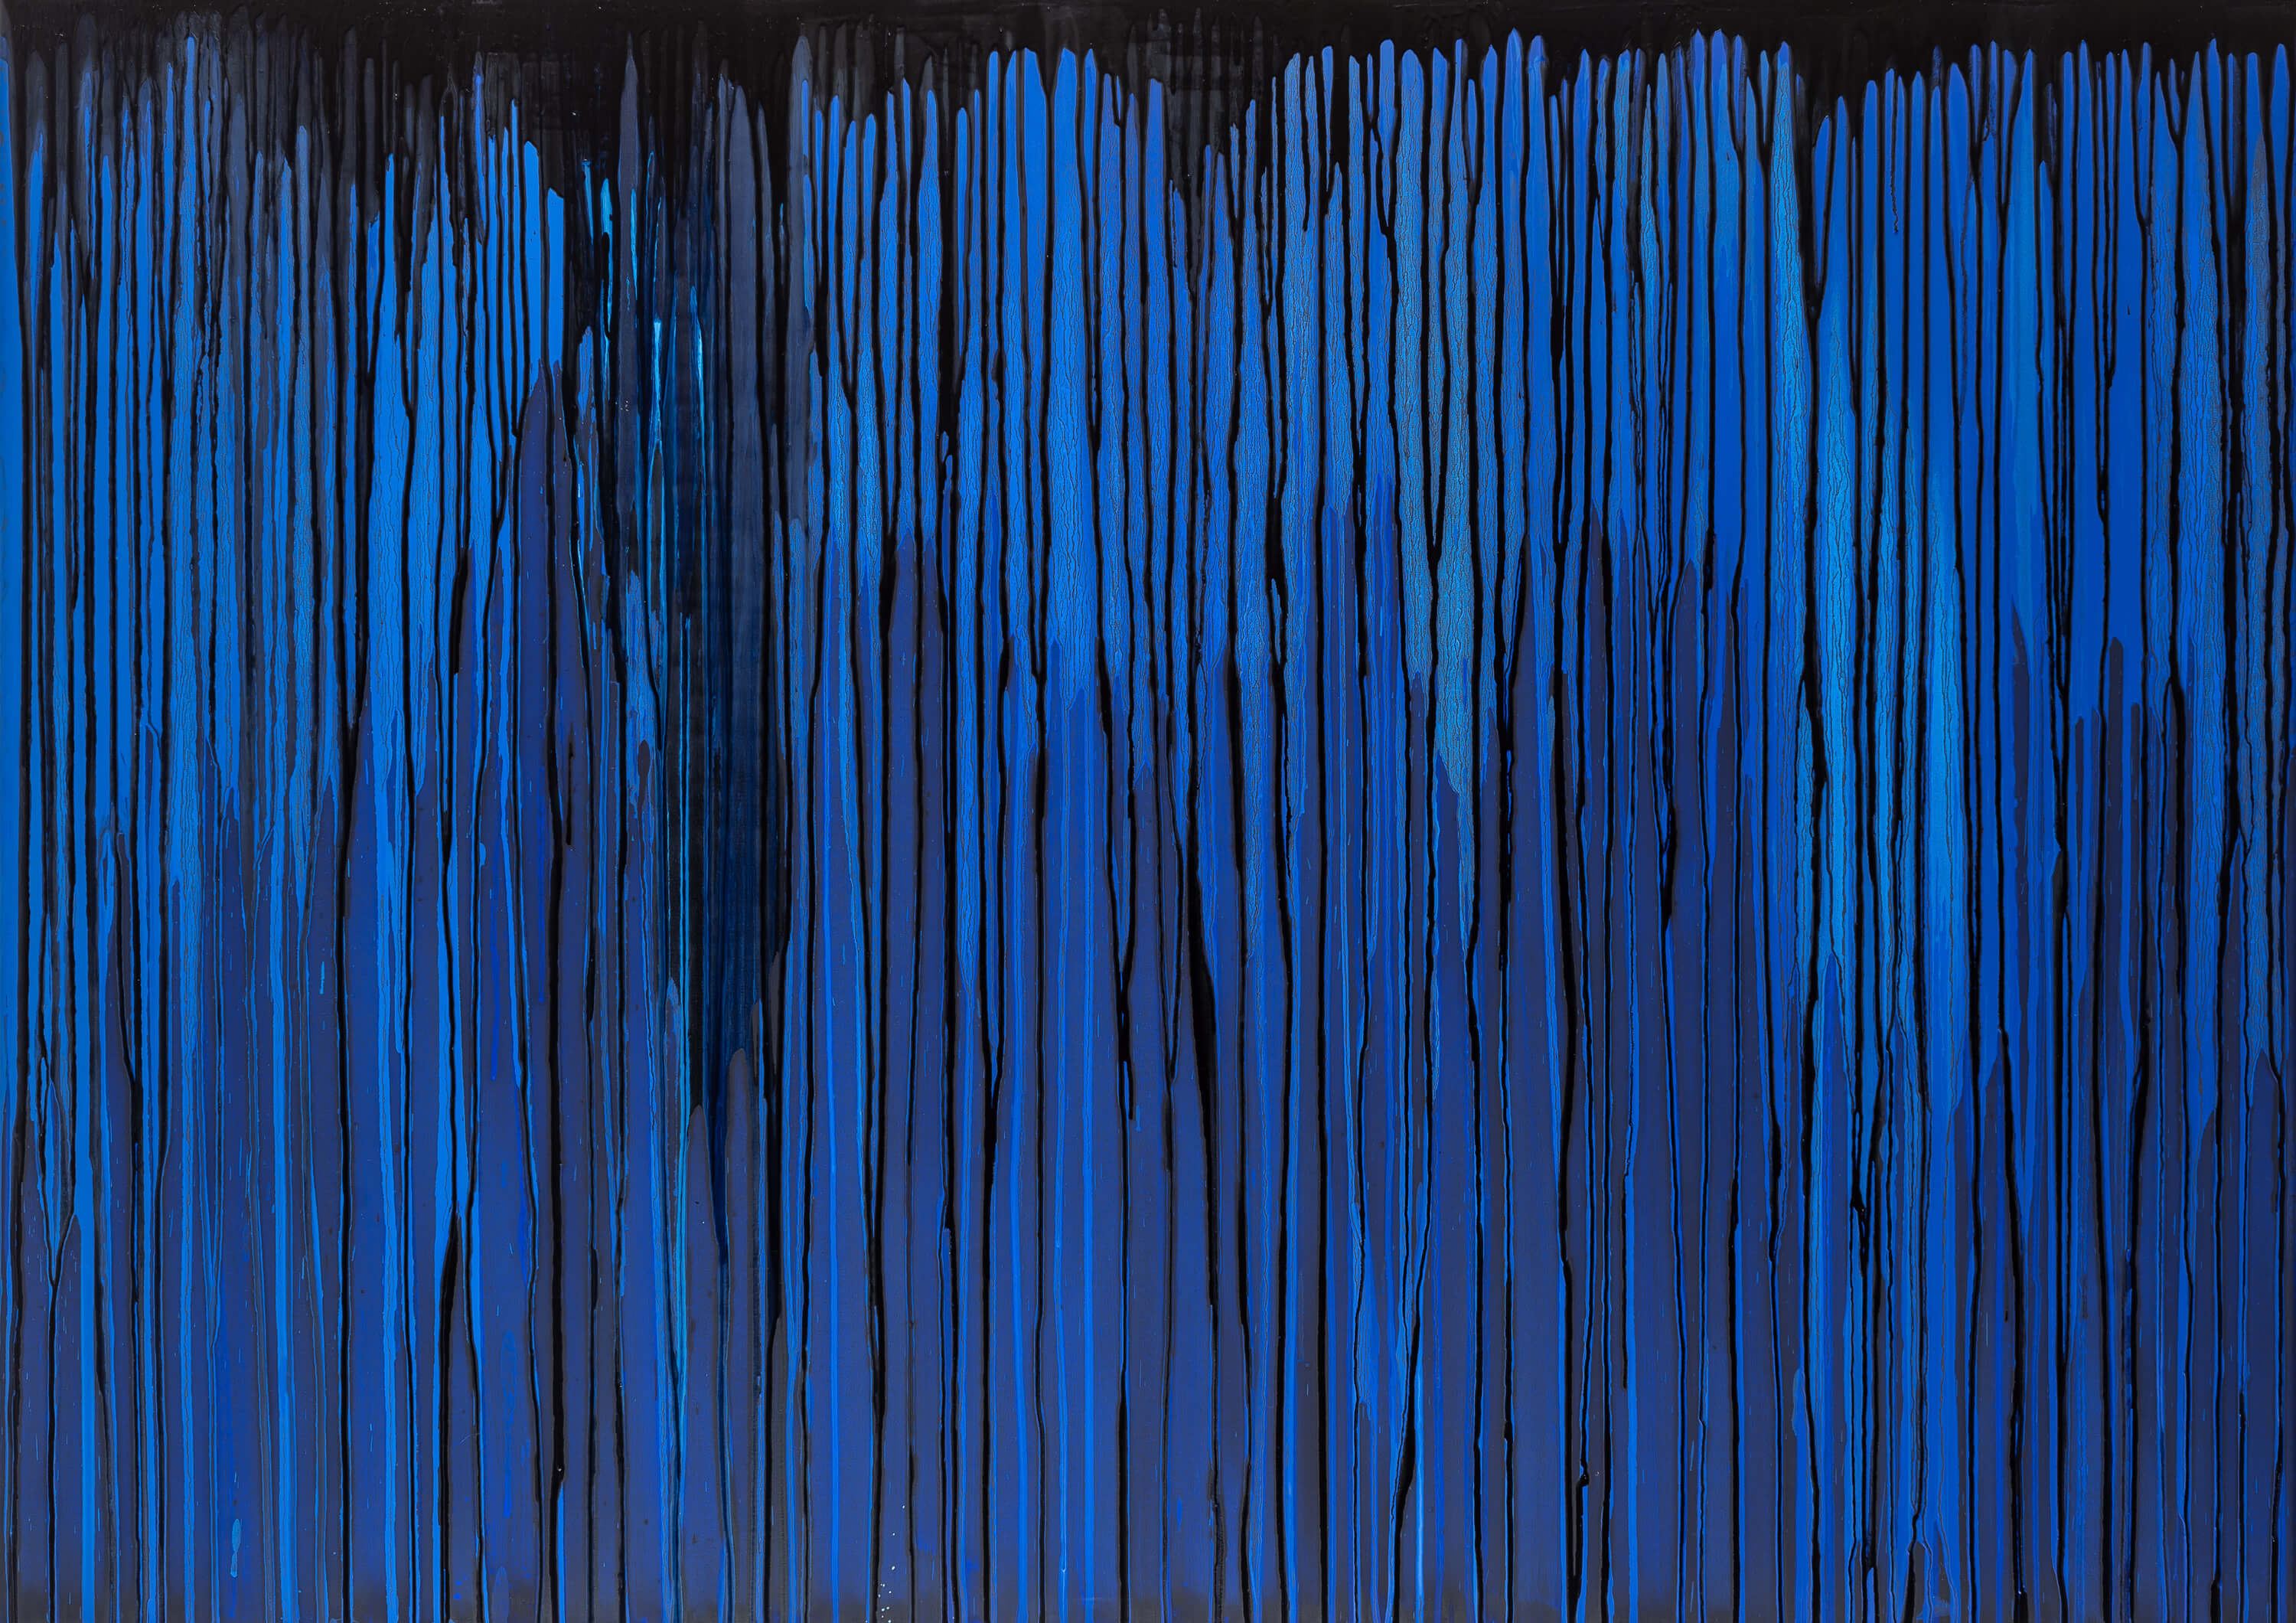 Joanna Borkowska Frequencies Blue 2013 oil and pigments on canvas 140 x 100 cm